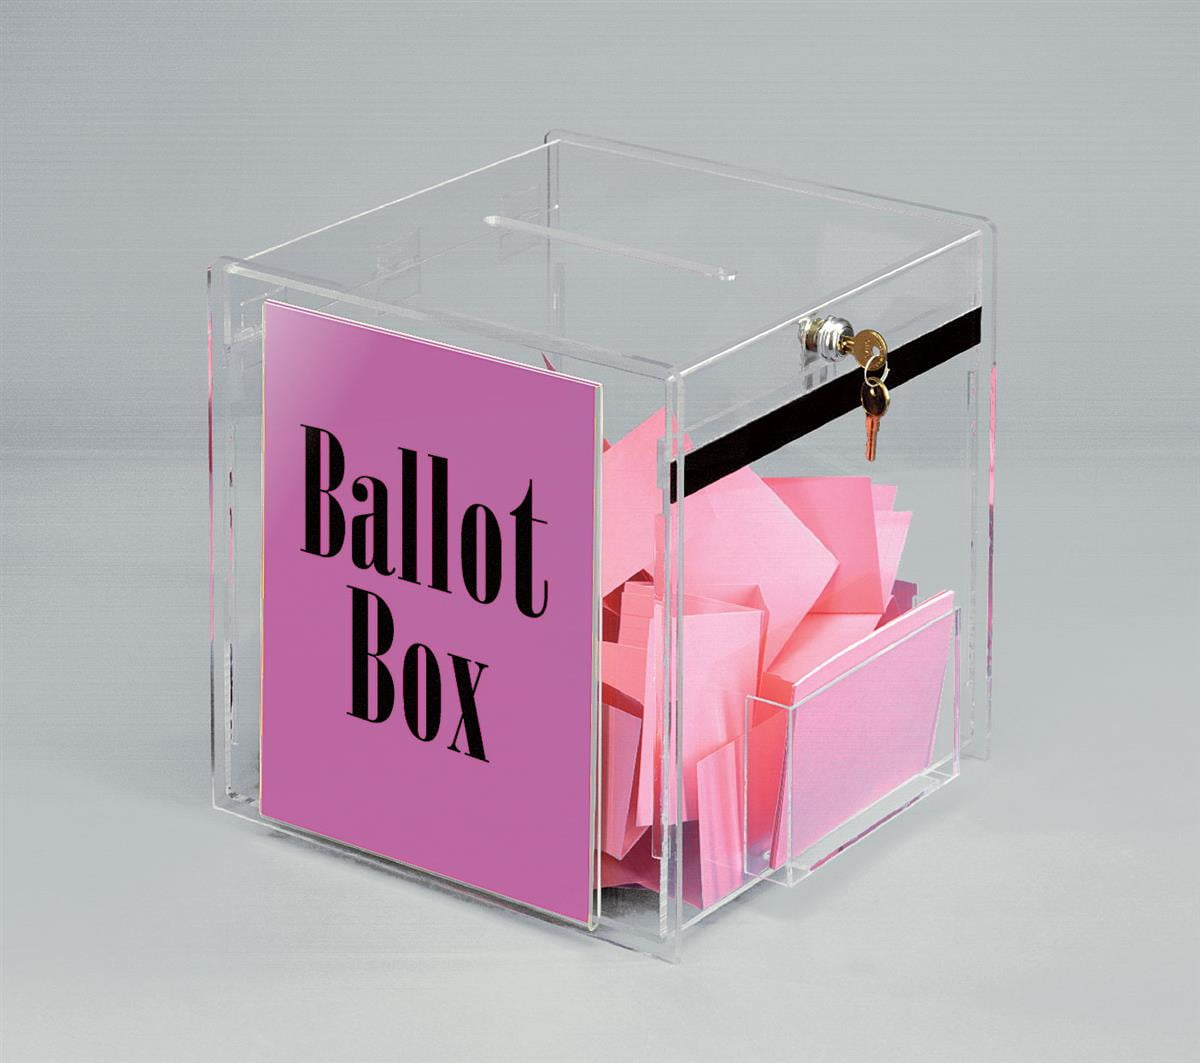 12 inch Cube Ballot Box, Suggestion Box with Key Lock and Side Pocket, Security Pen Included - Clear Acrylic (Bb)